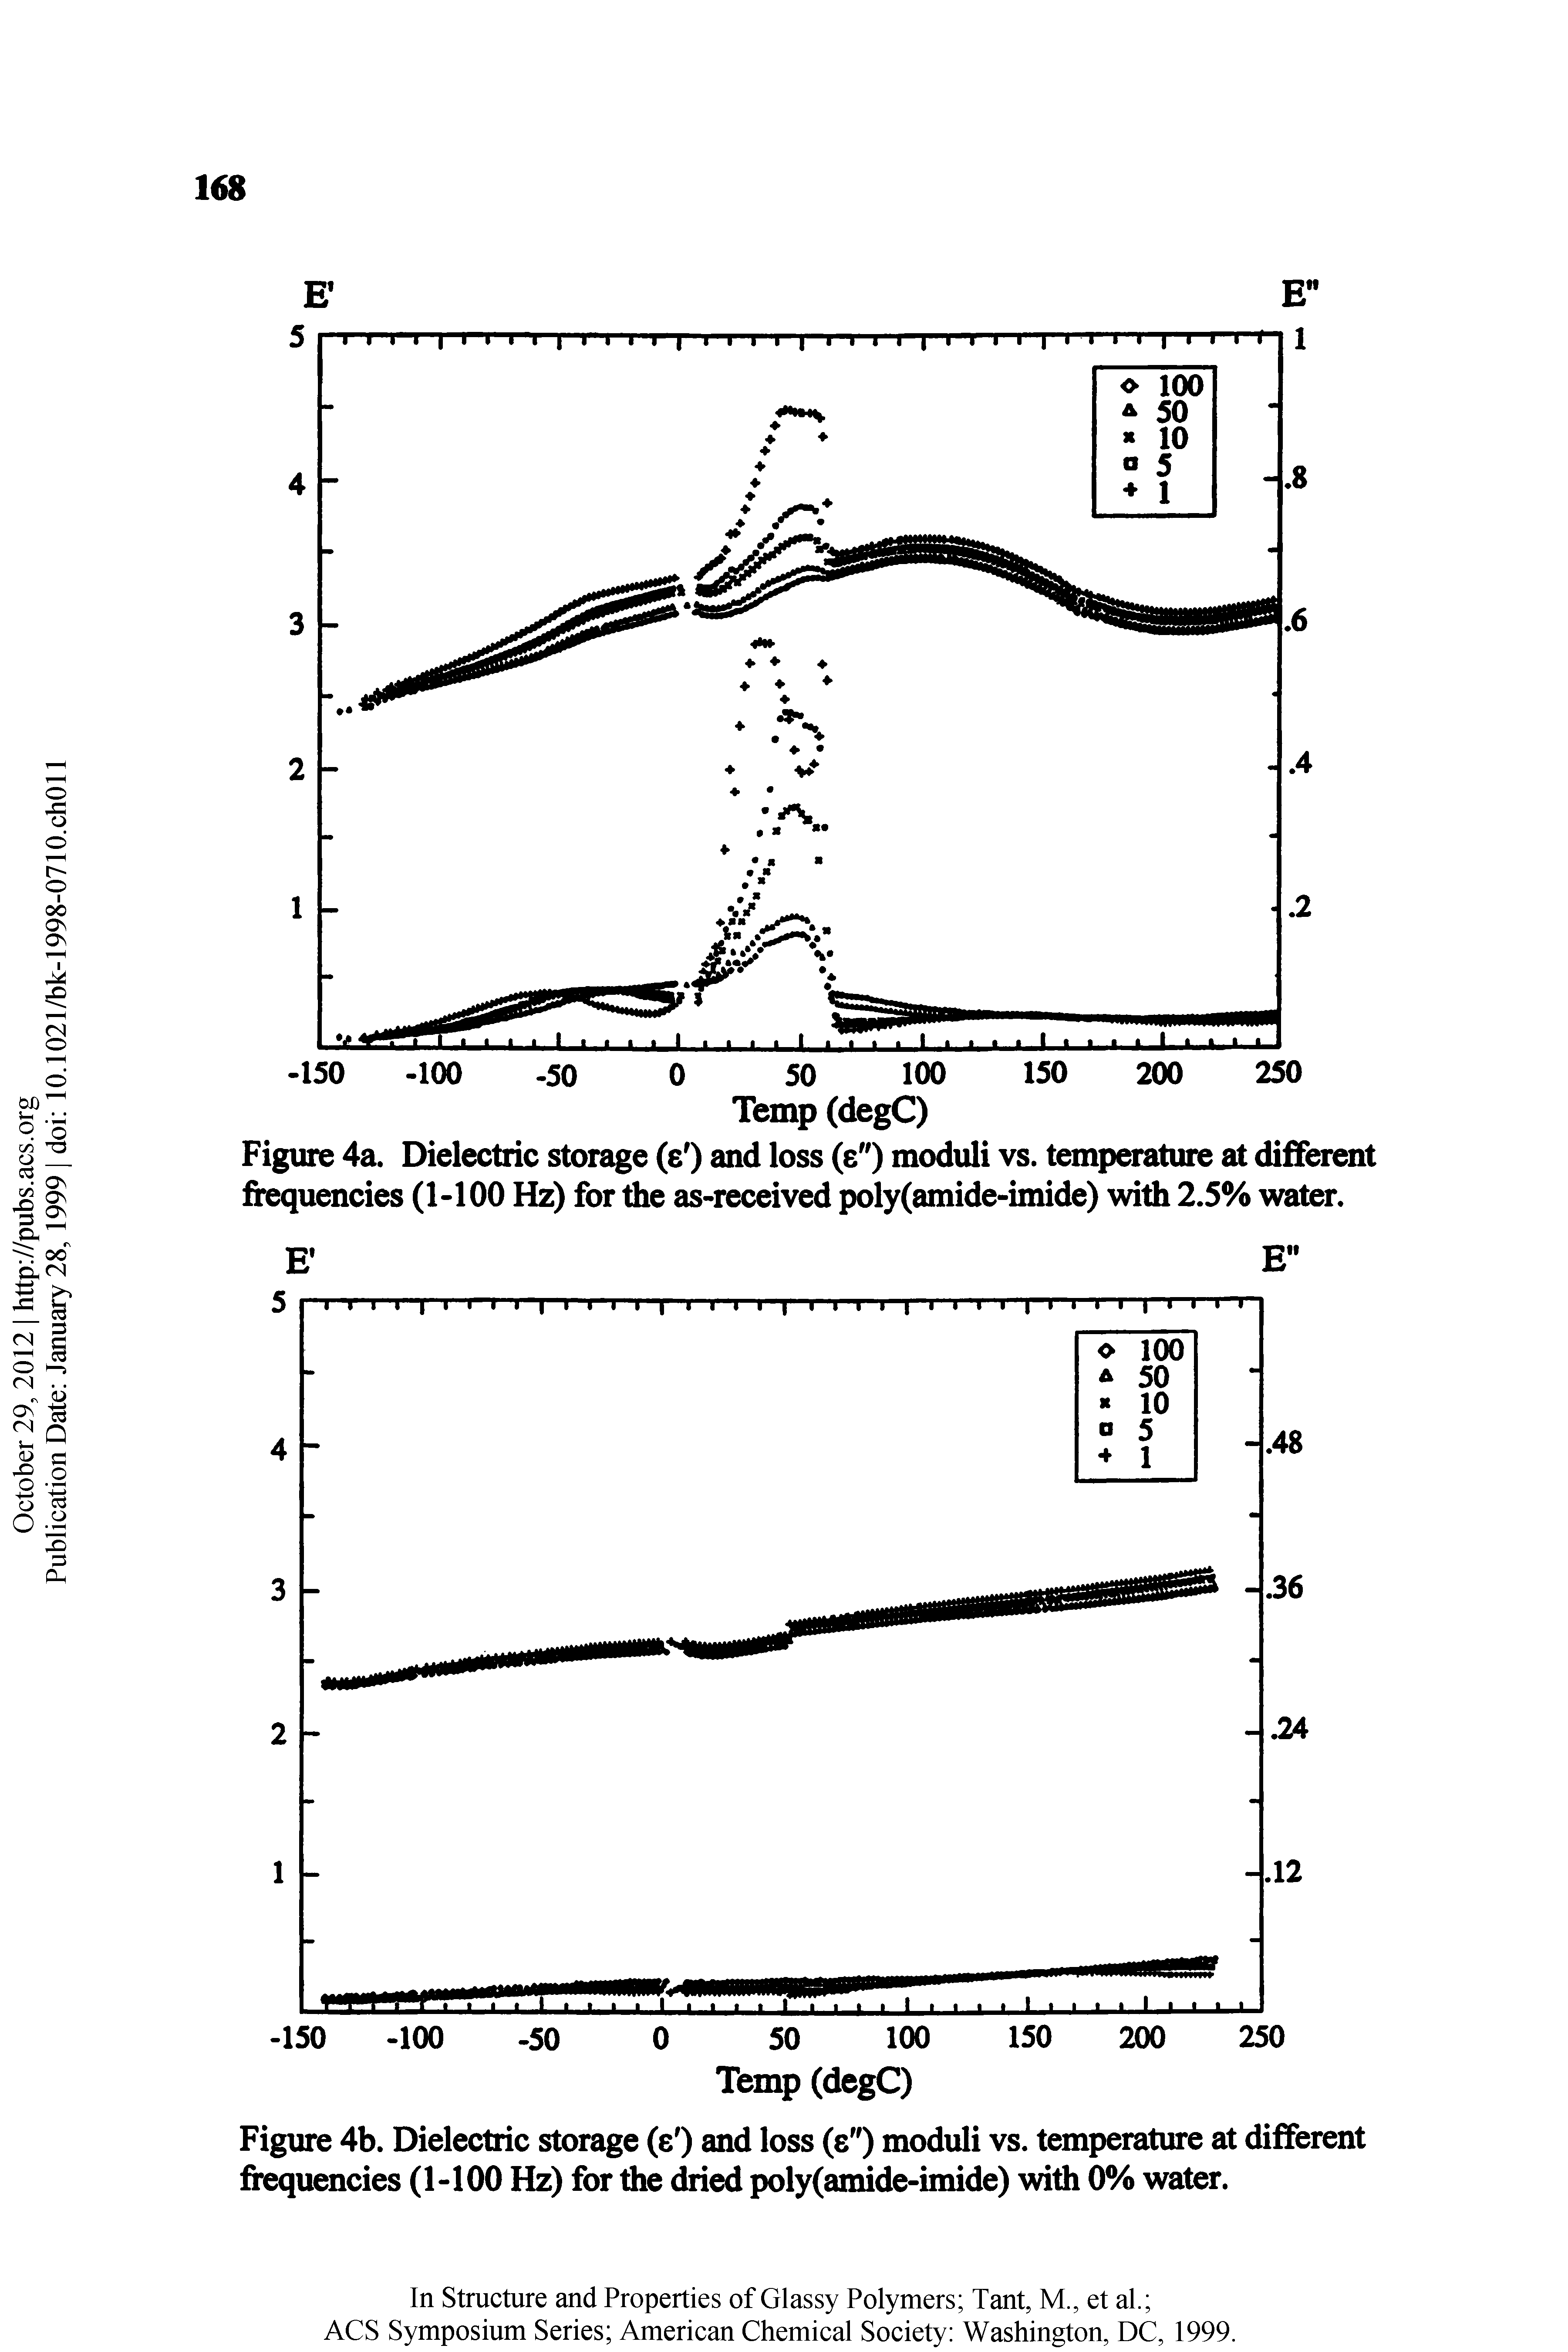 Figure 4b. Dielectric storage (e ) and loss (e") moduli vs. temperature at different frequencies (1-100 Hz) for the Aied poly(amide-imide) with 0% water.